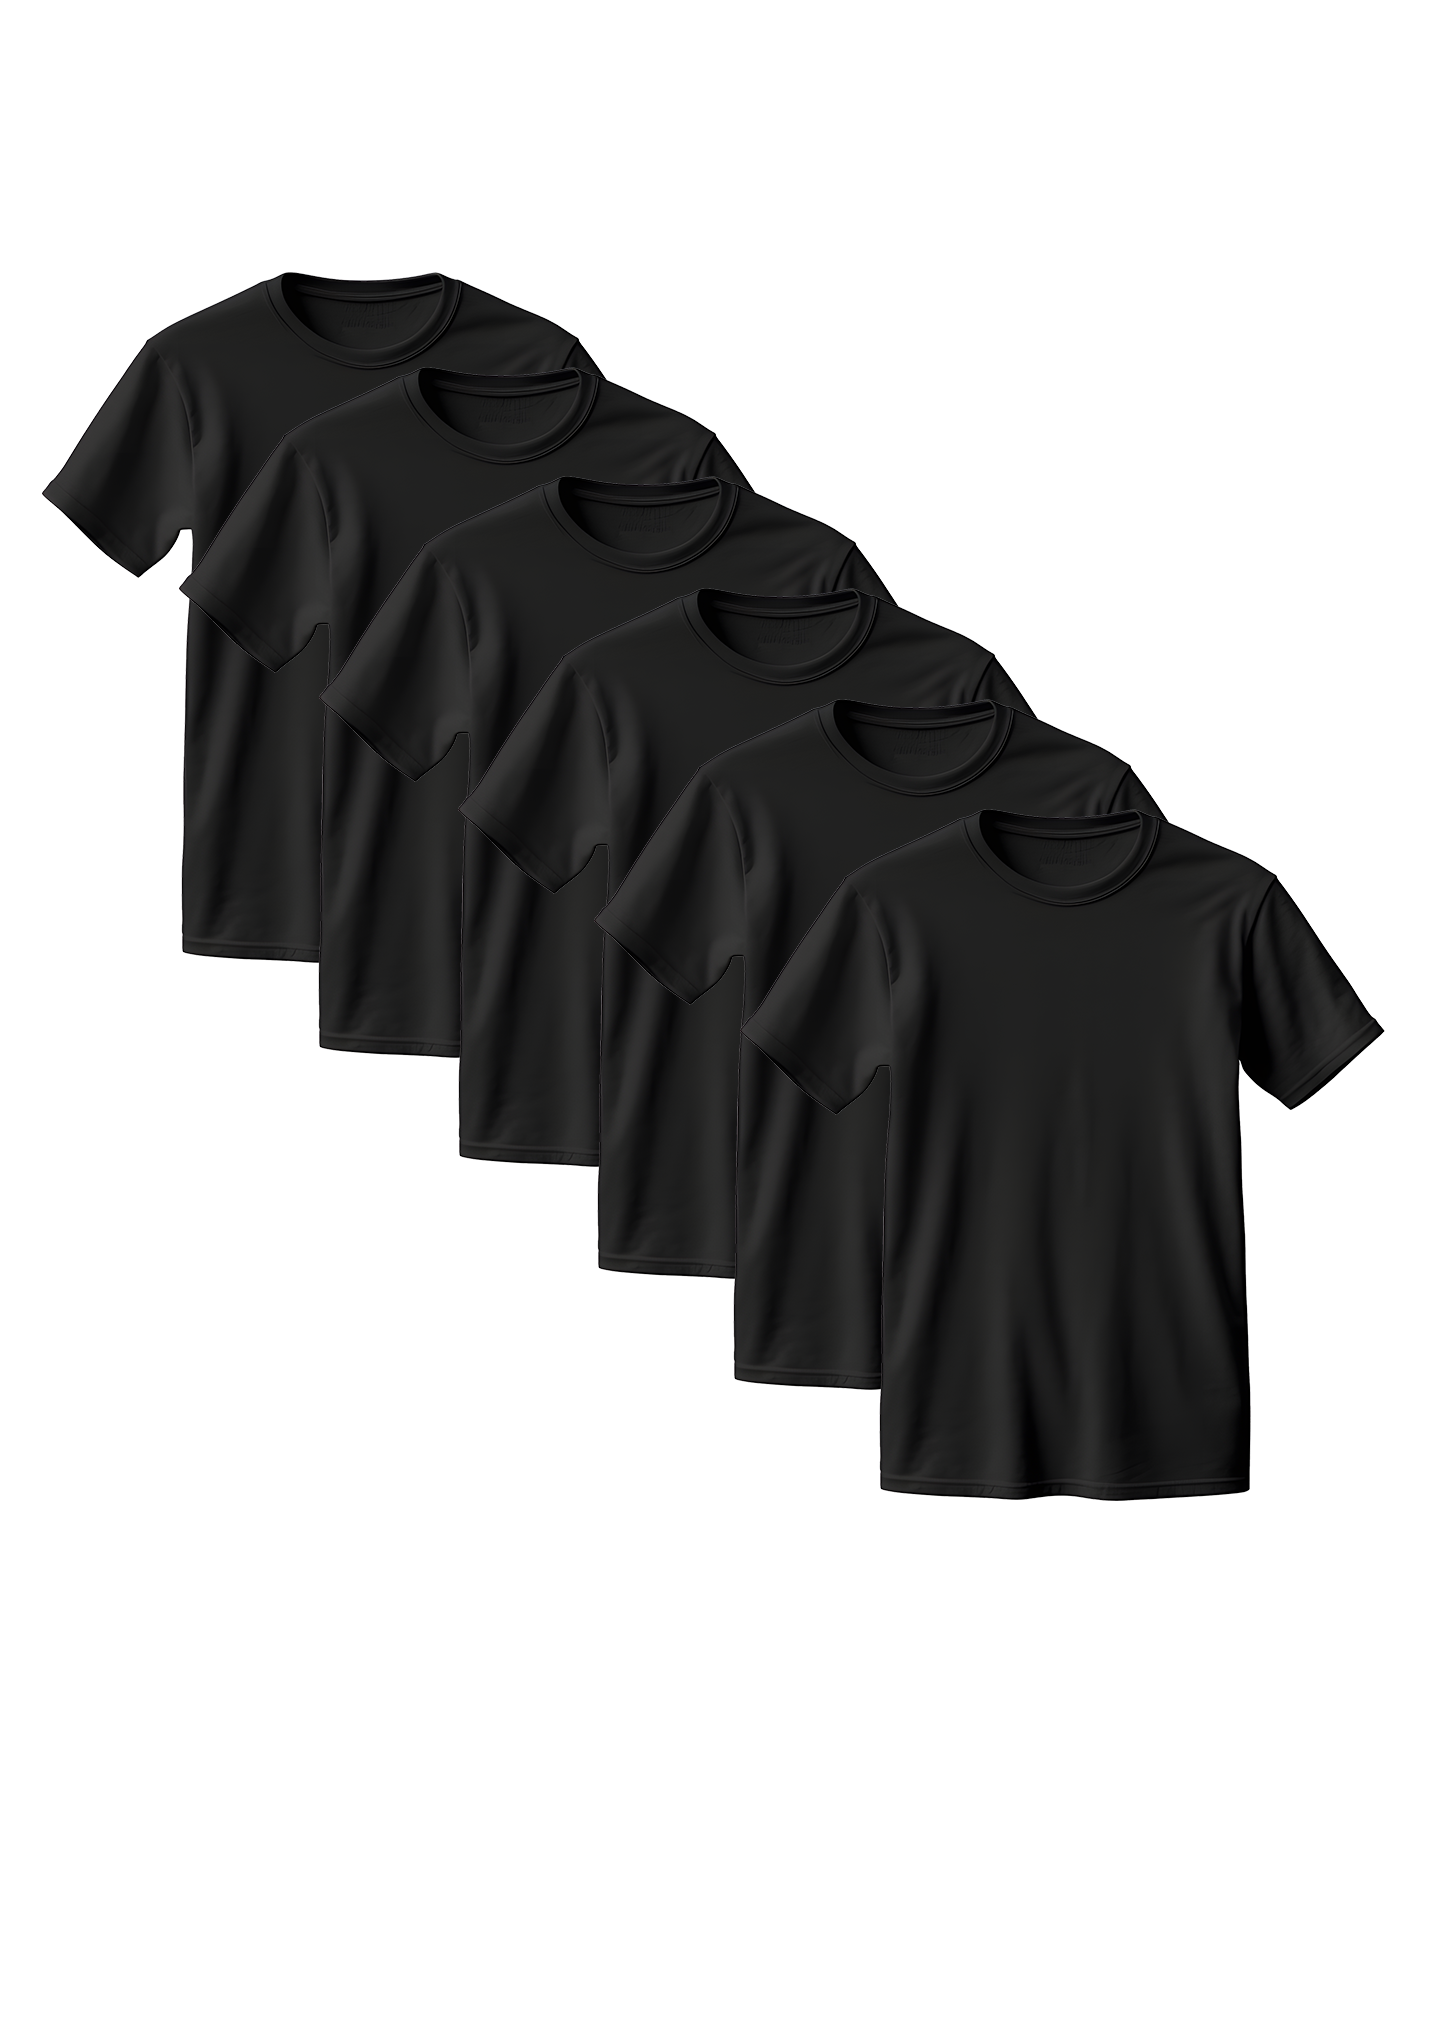 Black Combed Cotton T-Shirt 6-Pack